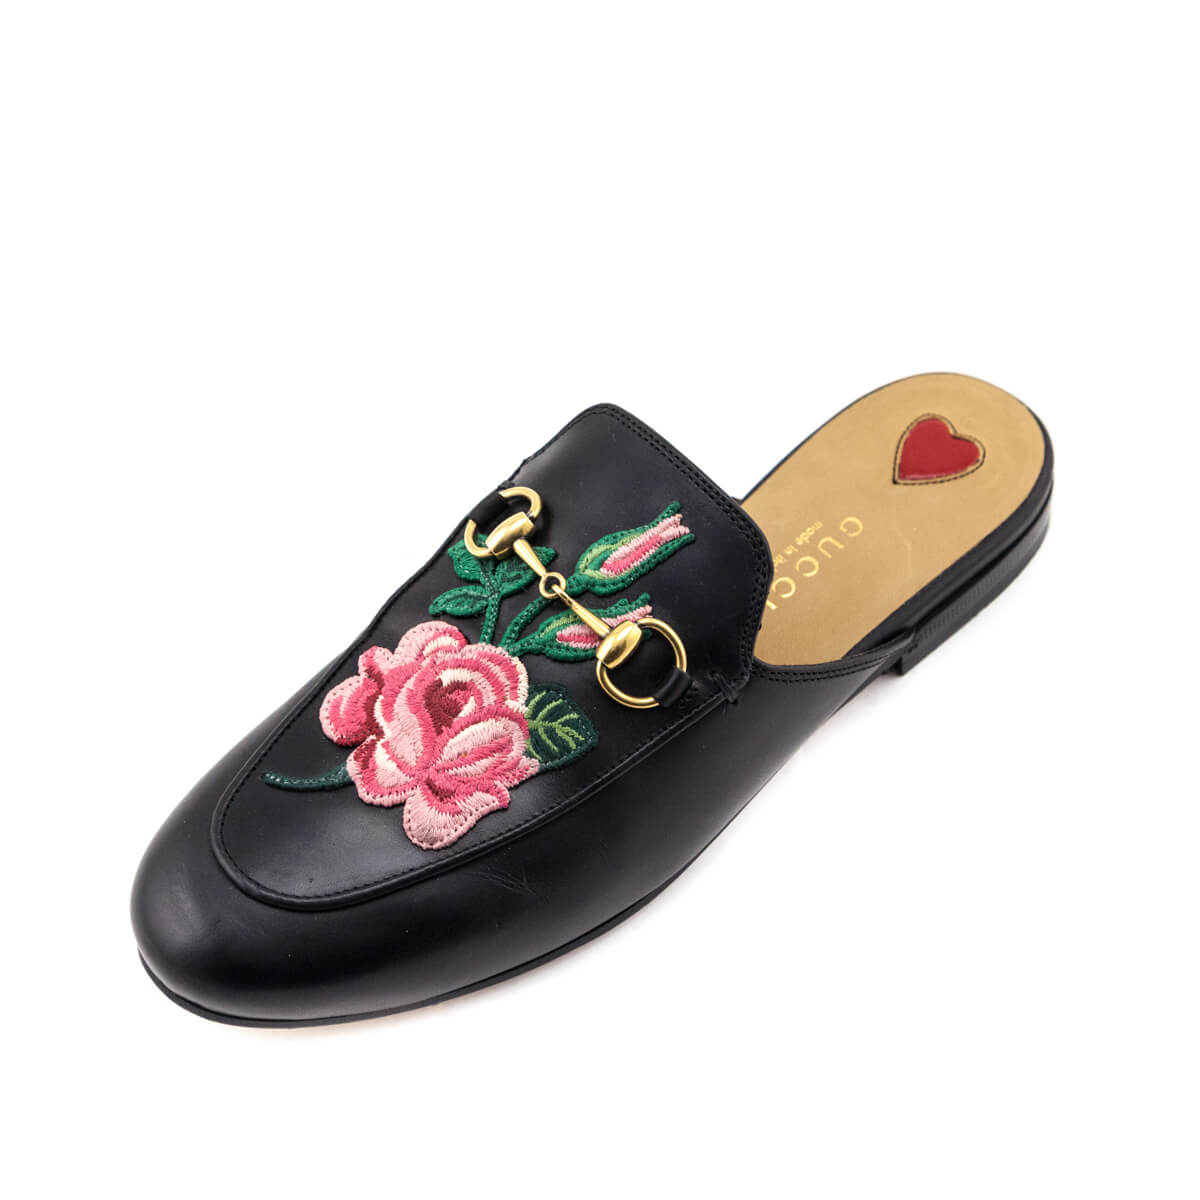 Gucci Black Leather Embroidered Princetown Mules Size US 6 | EU 36 - Love that Bag etc - Preowned Authentic Designer Handbags & Preloved Fashions